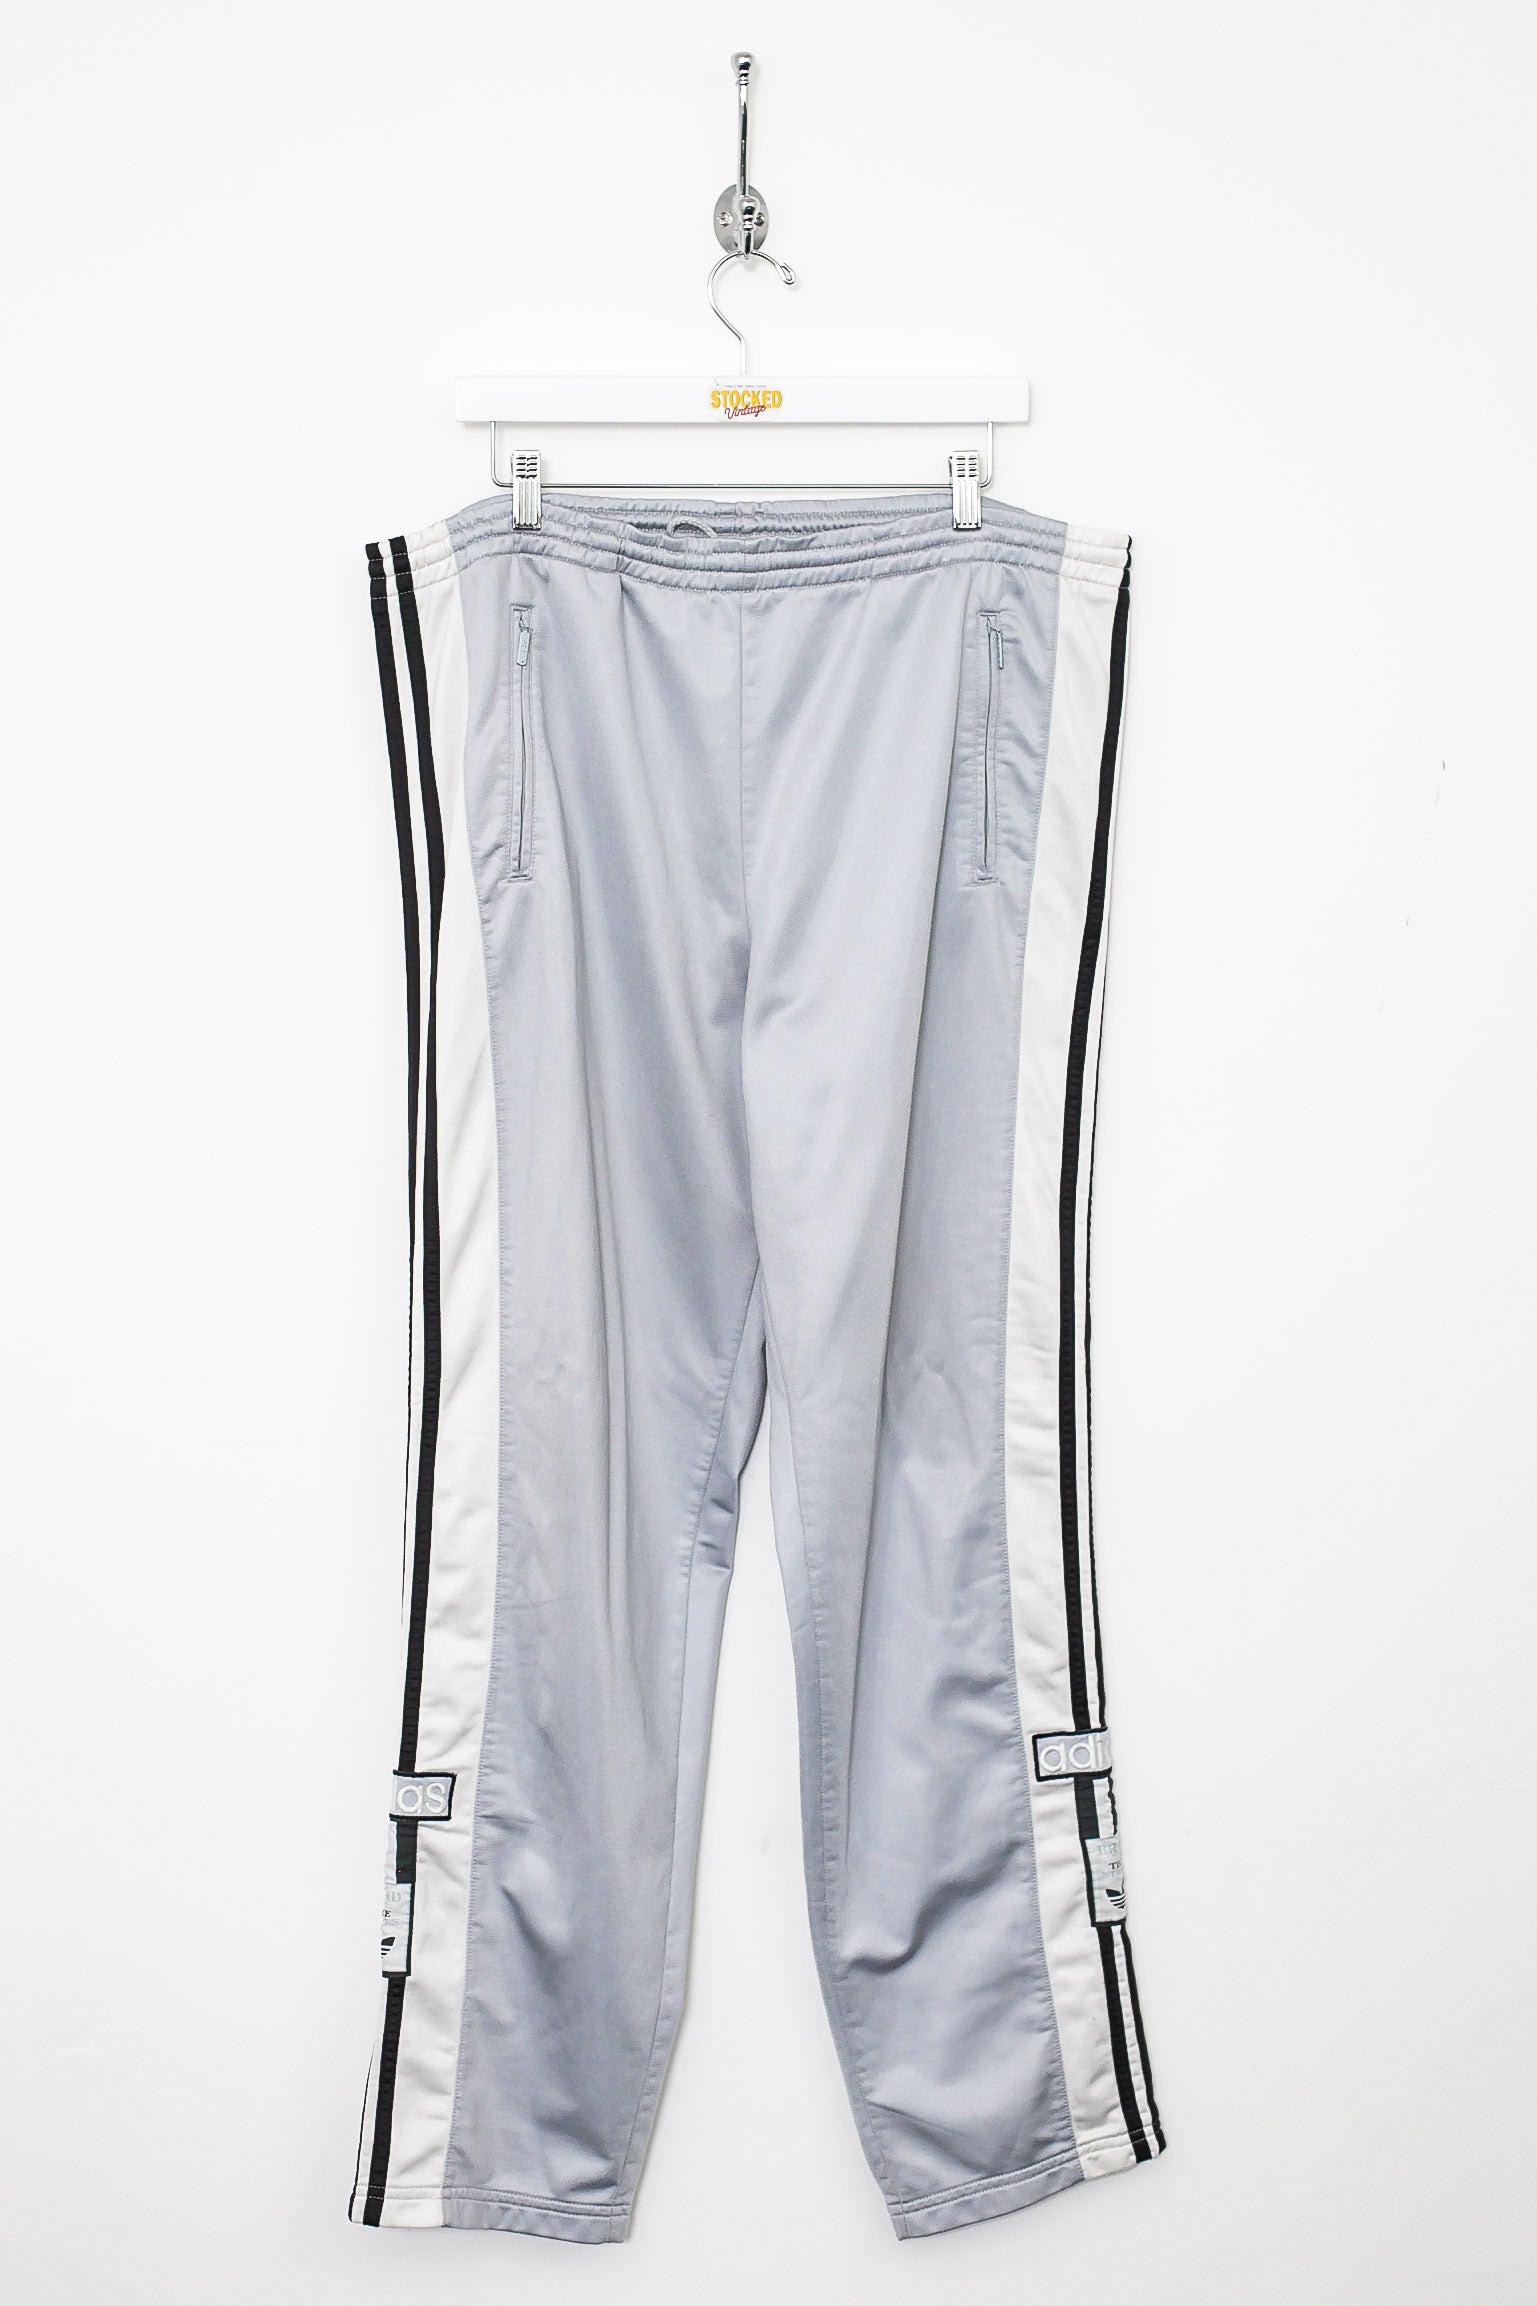 Vintage Adidas Popper trousers in grey with... - Depop